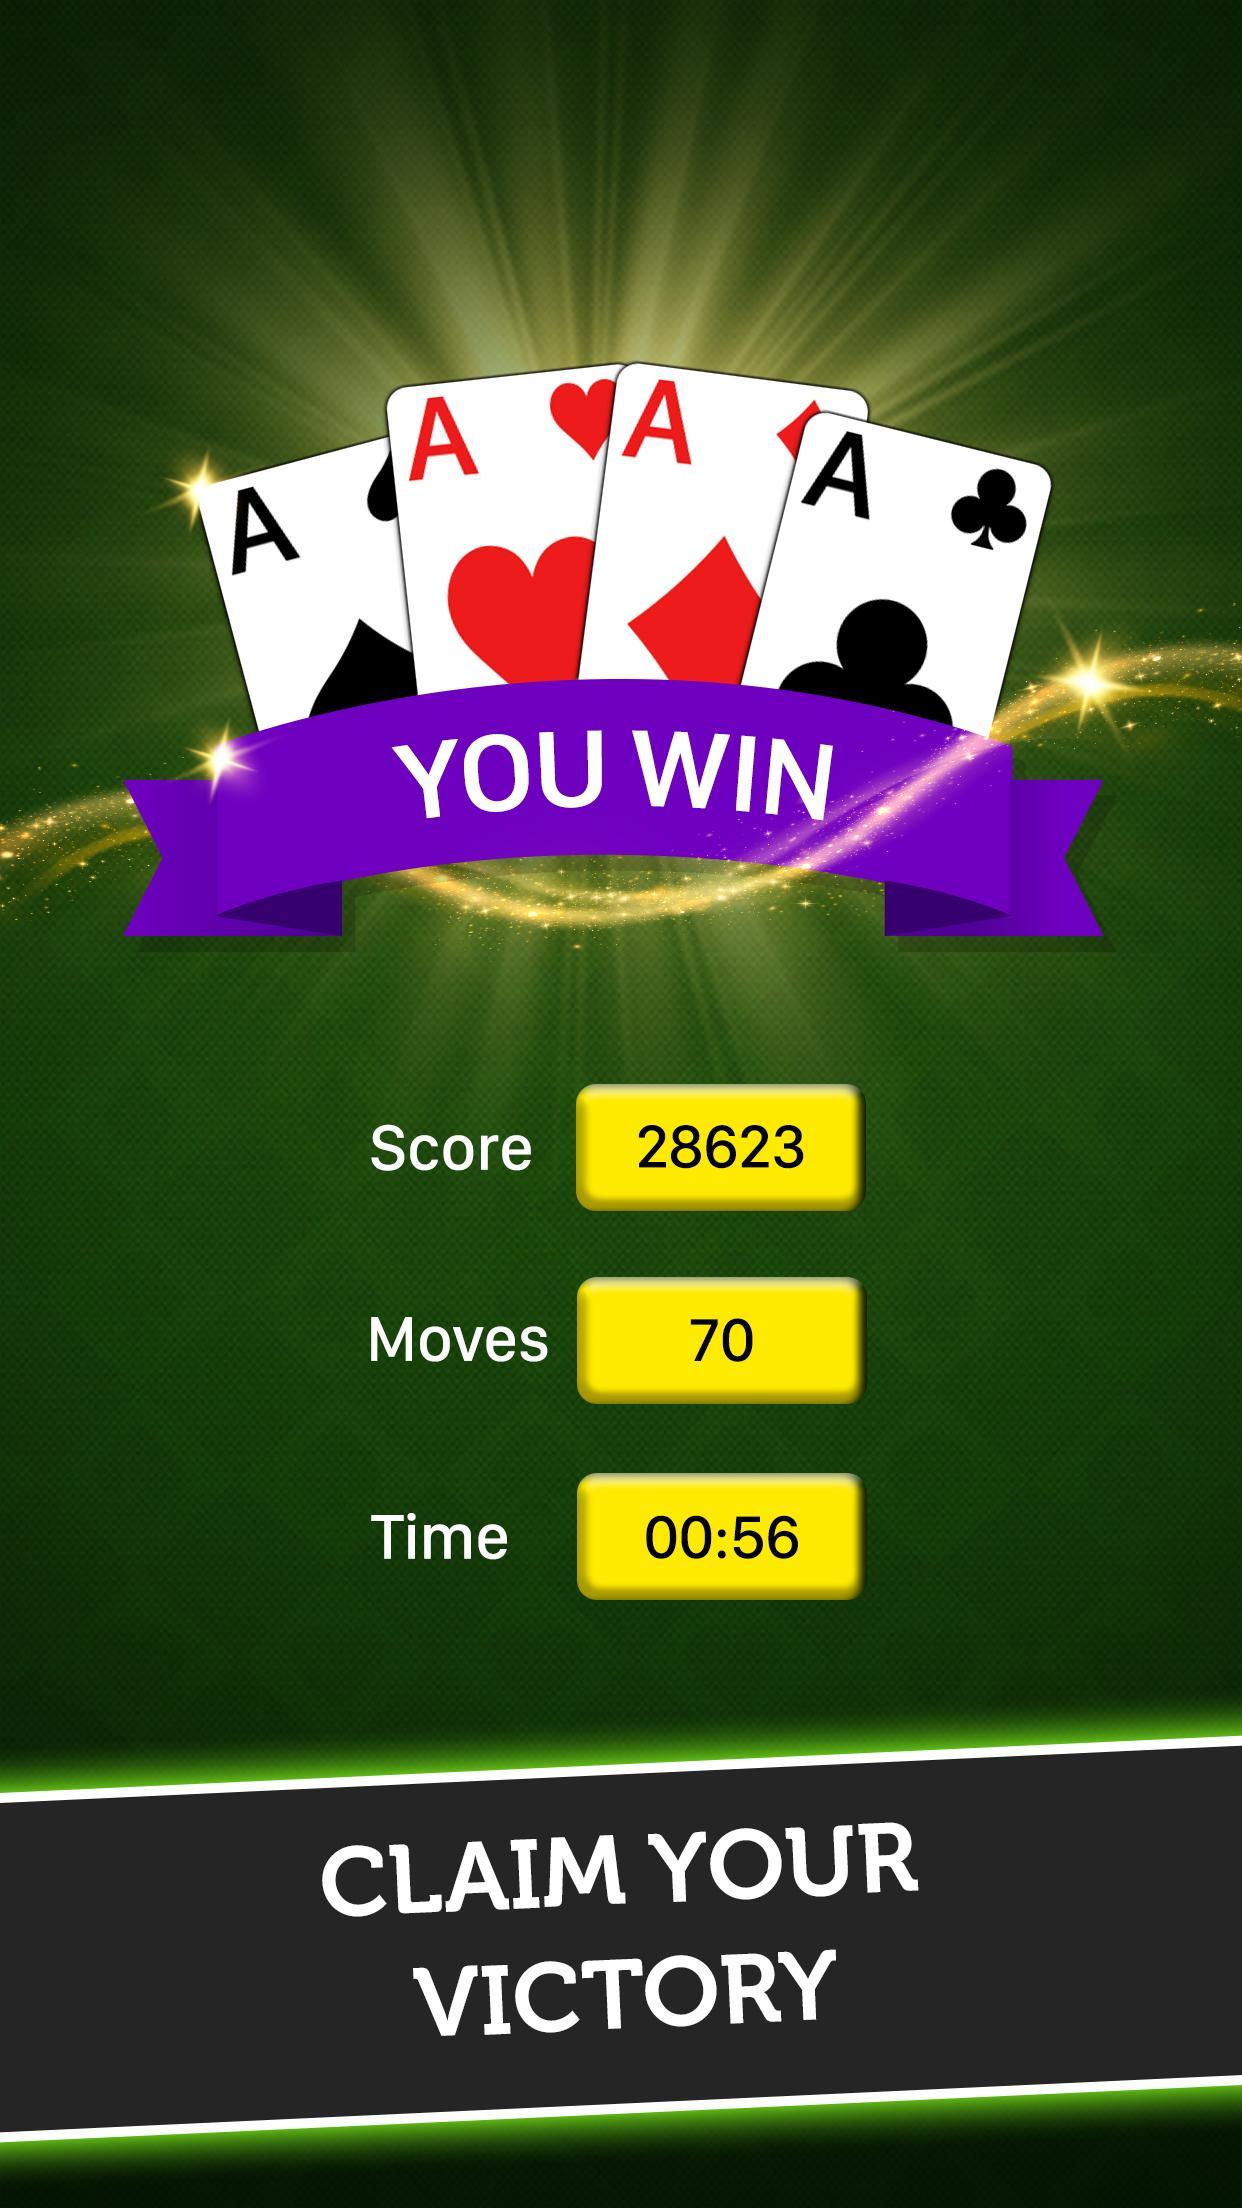 Classic Solitaire 2020 - Free Card Game 1.152.0 Screenshot 3